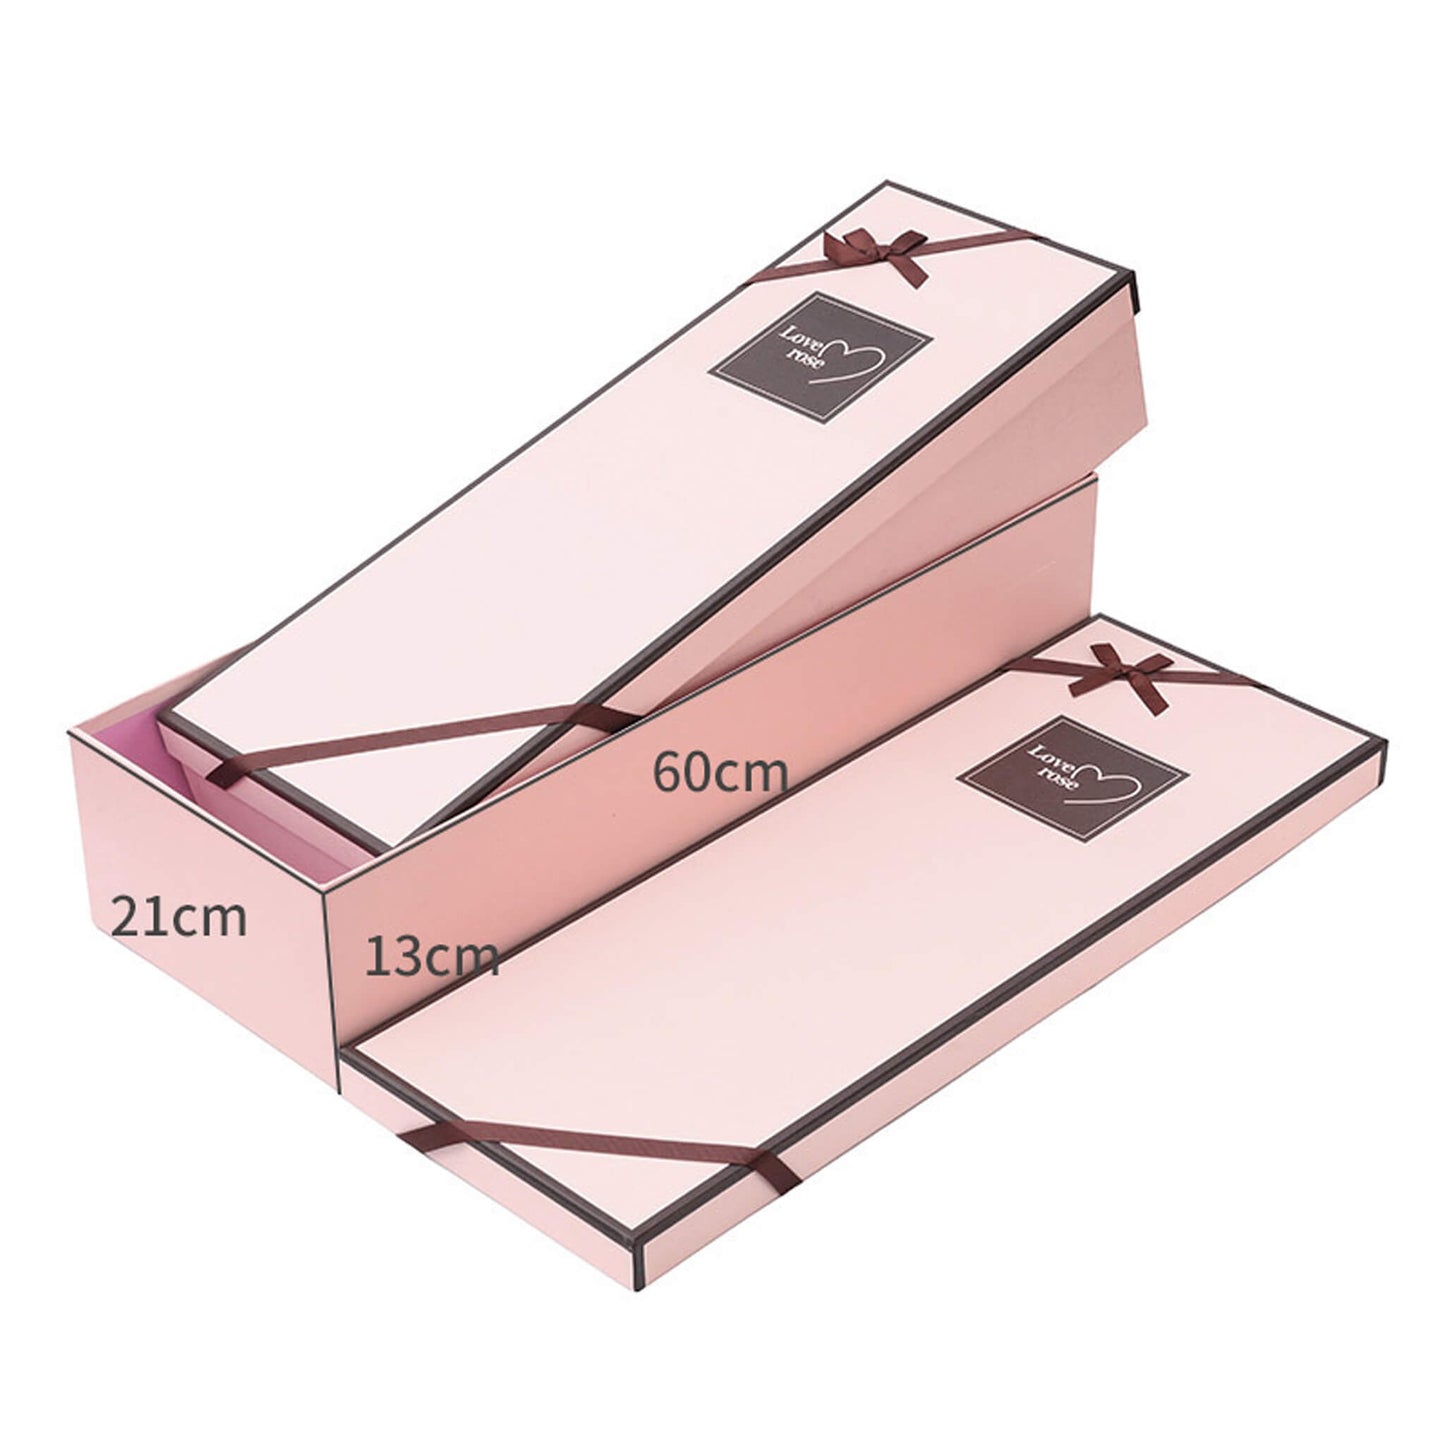 Set of 2 Pieces Square Gift Packaging Box with Lid - Bulk Lots